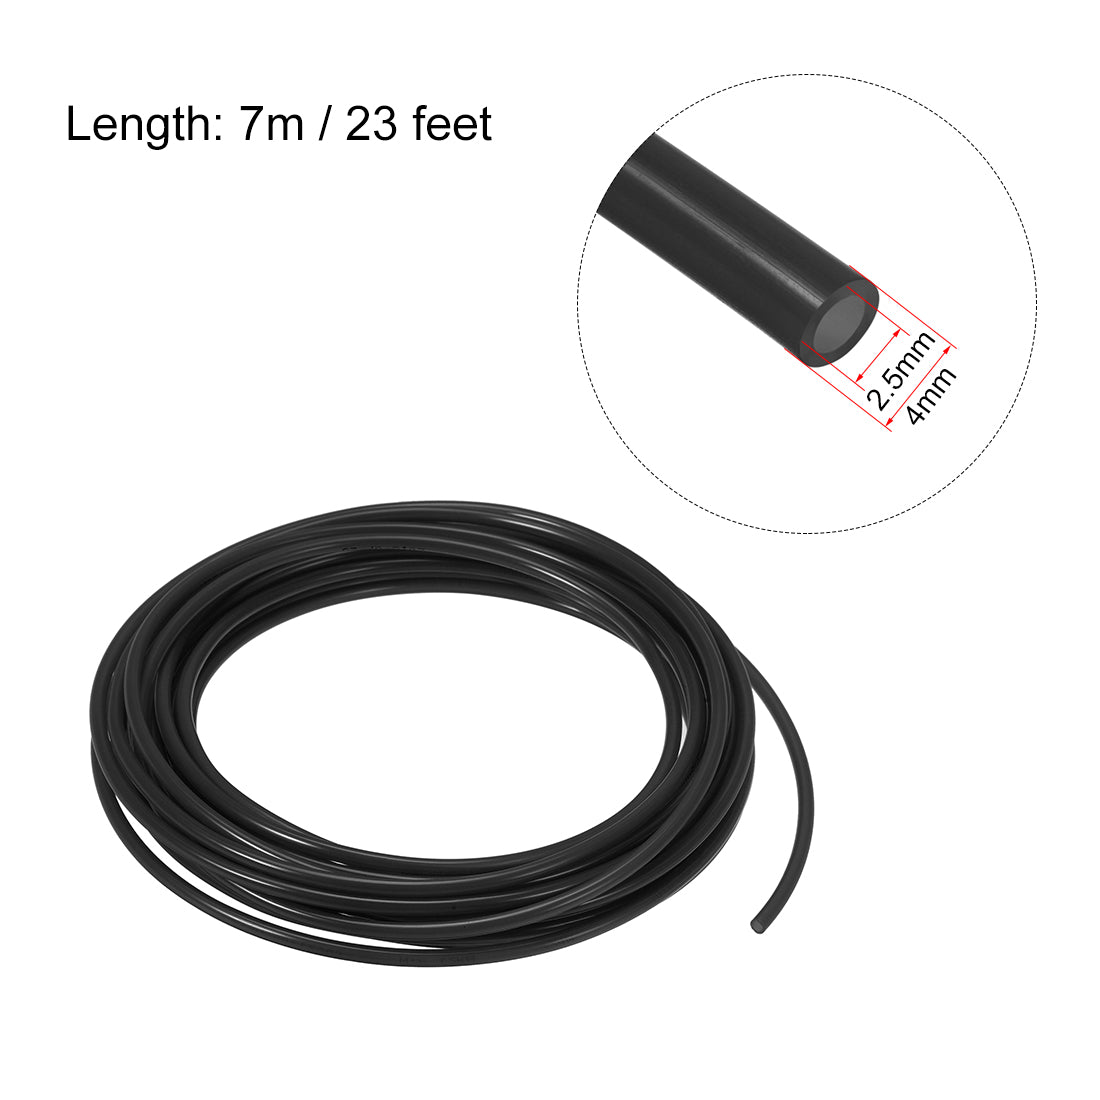 uxcell Uxcell 4mm OD 2.5mm ID 7m Long Black PU Air Tubing Pipe Hose for Air Line Tube Fluid Transfer Pneumatic Tubing